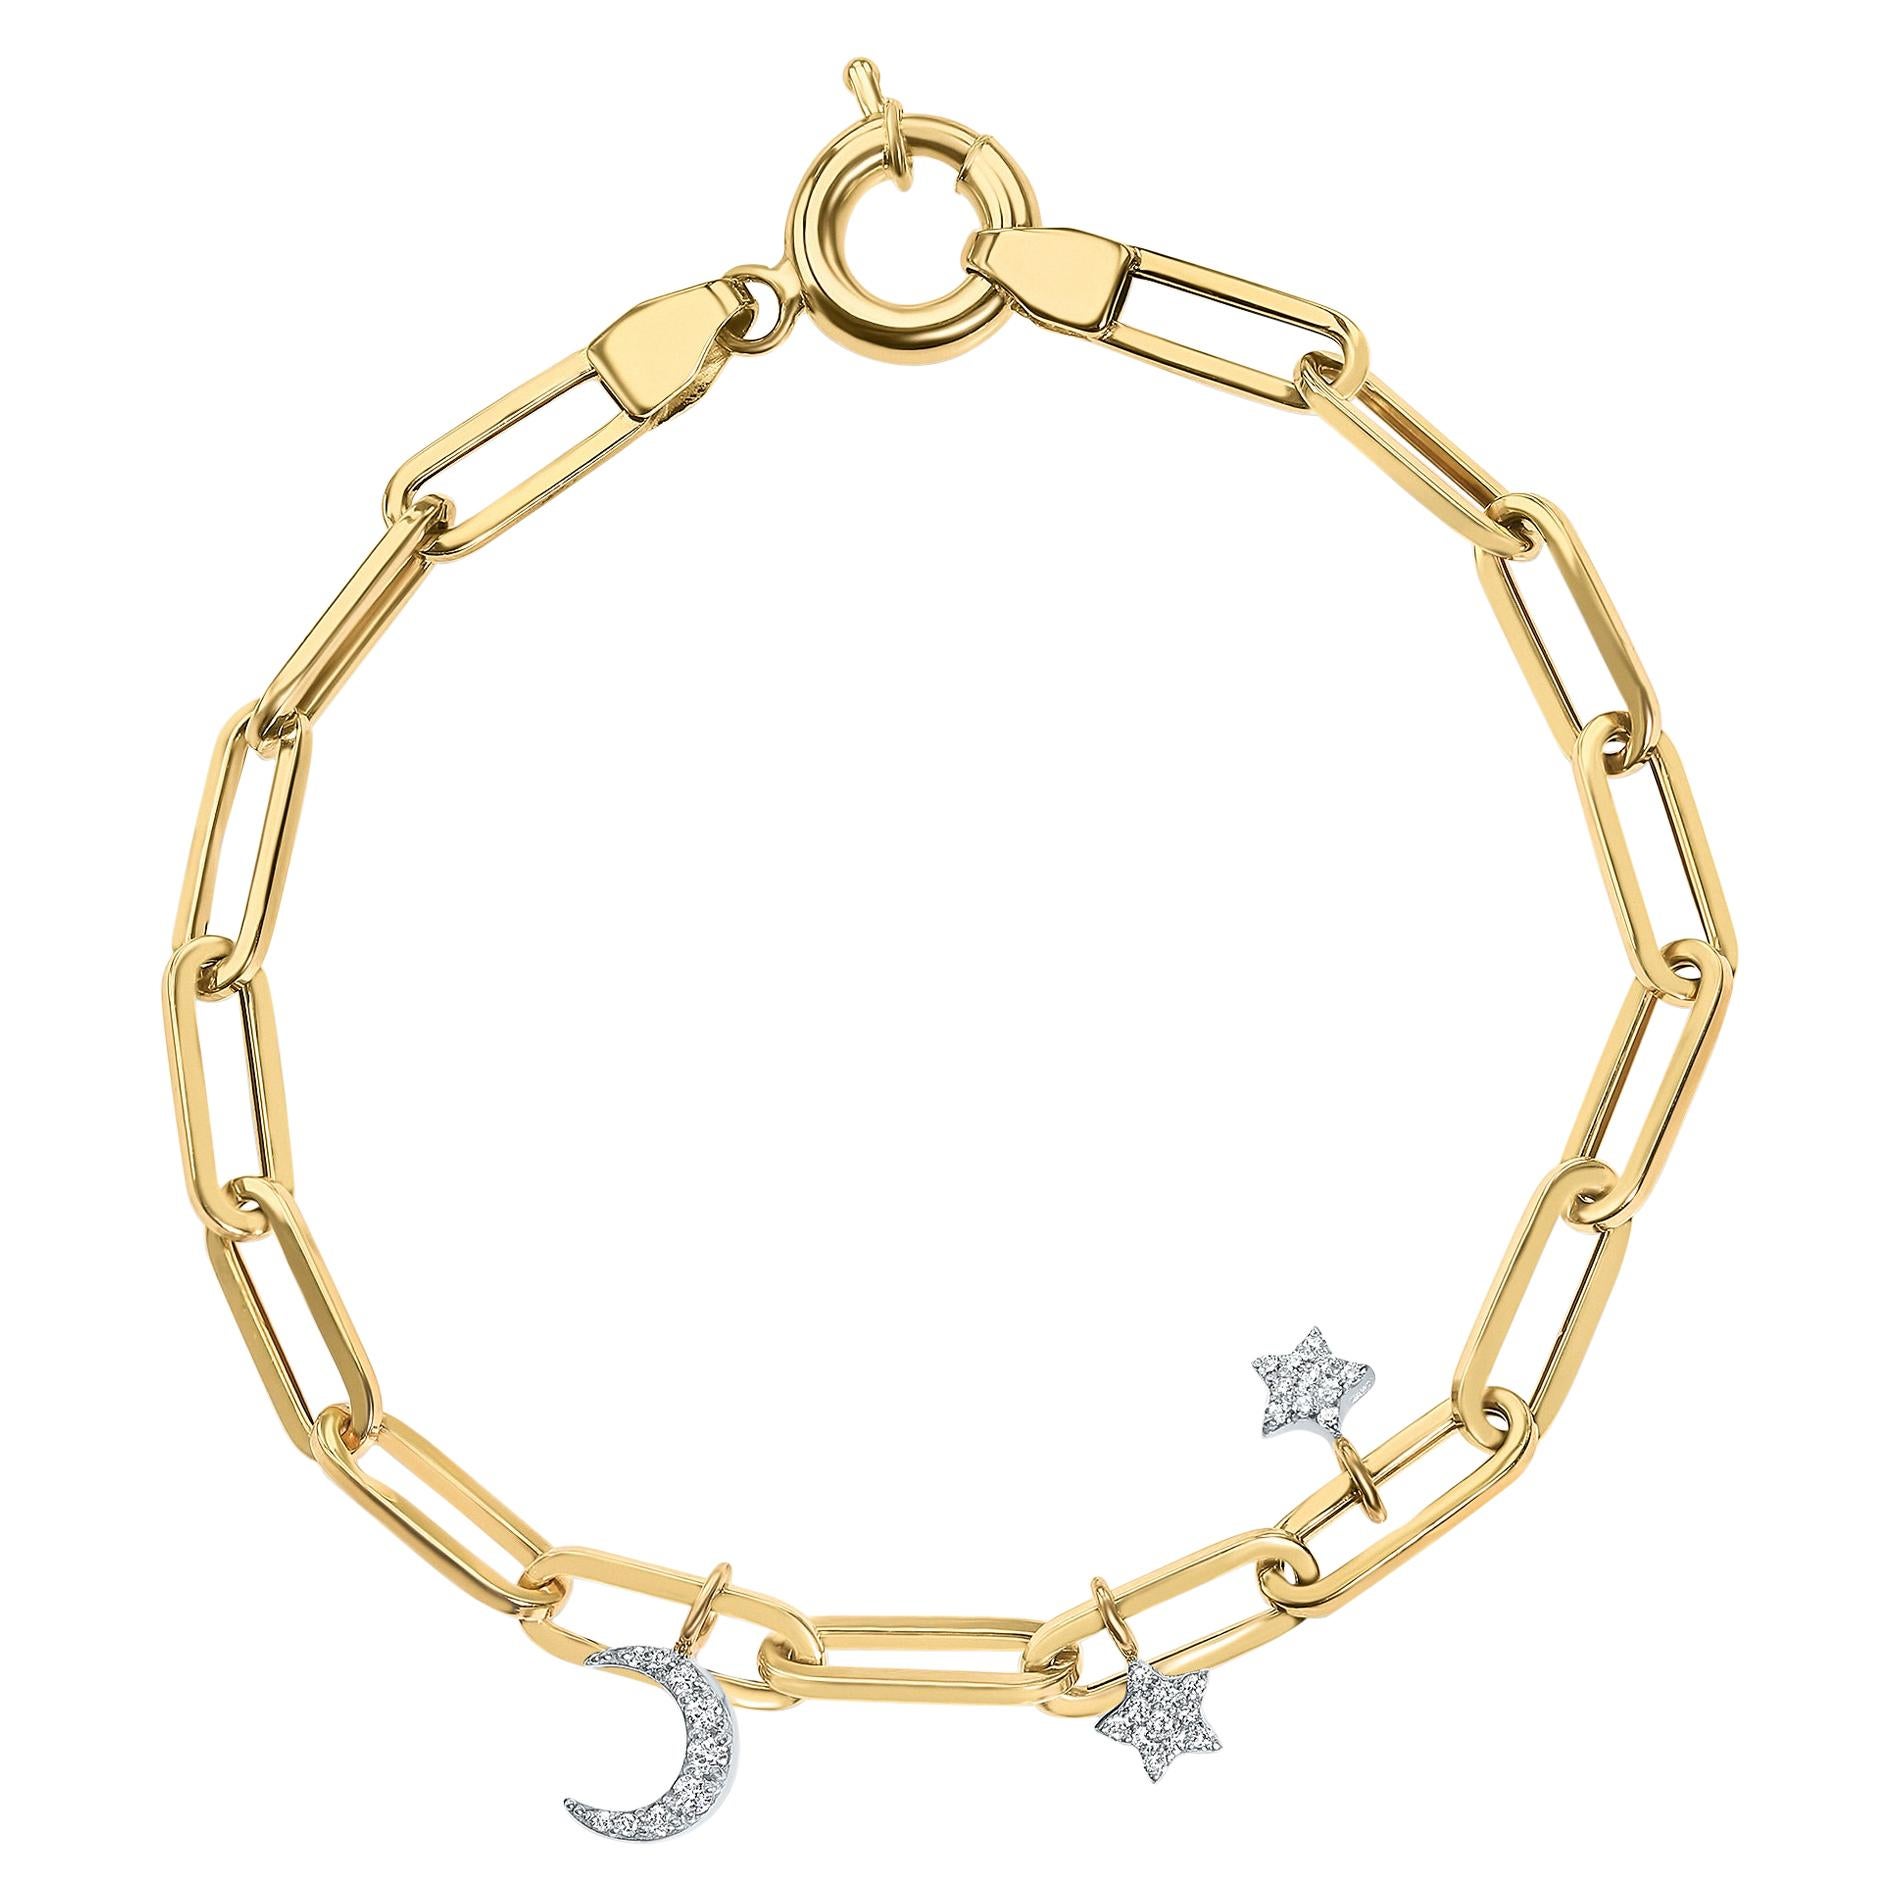 0.14 Carat Diamond Moon and Star Charms Cable Chain Bracelet - Shlomit Rogel